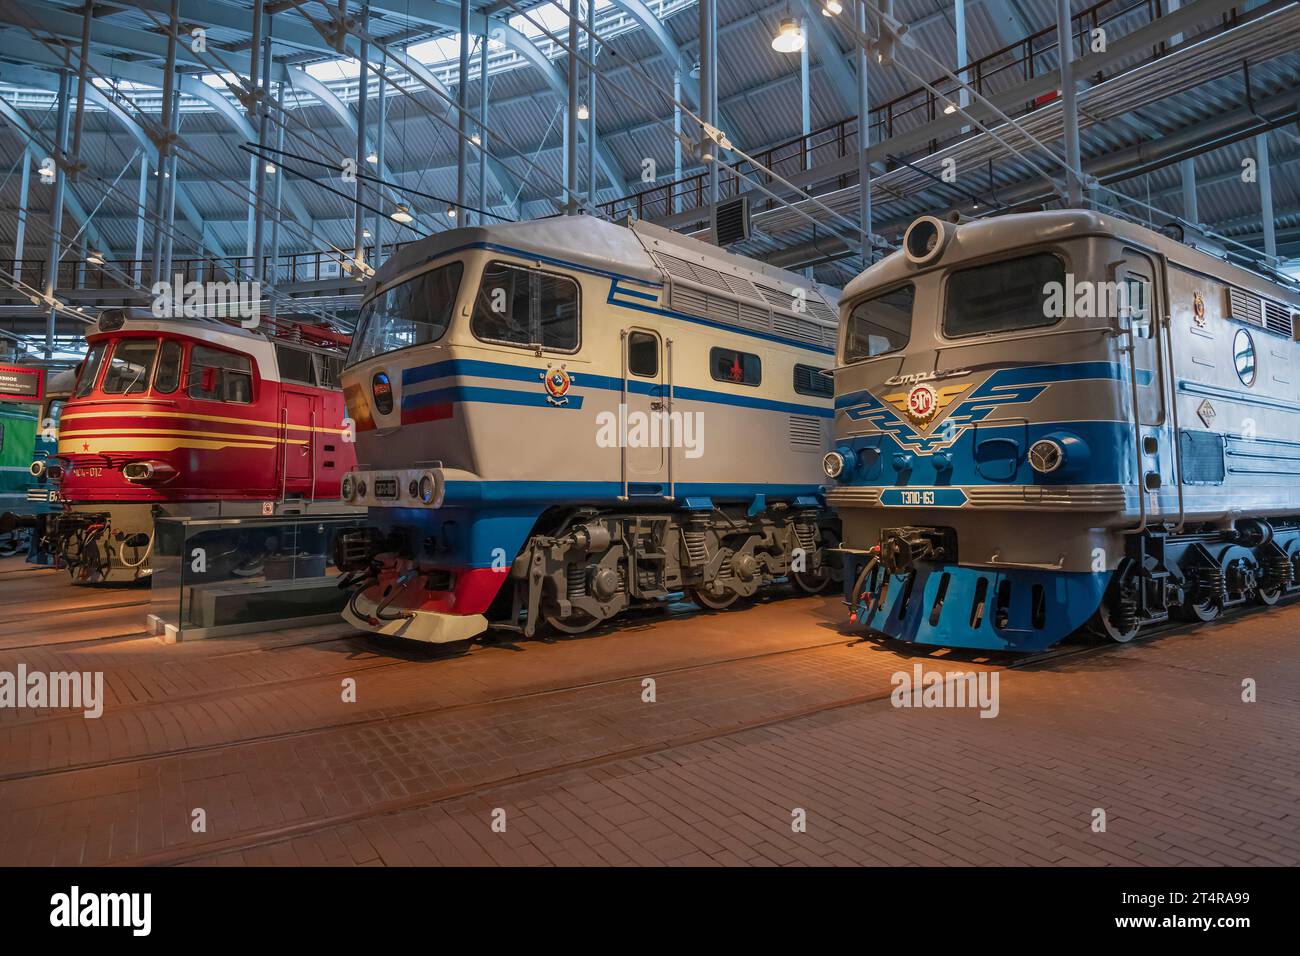 ST. PETERSBURG, RUSSIA - JANUARY 12, 2022: Passenger diesel locomotives of the railways of the Soviet Union in the exhibition of the Museum of Railway Stock Photo